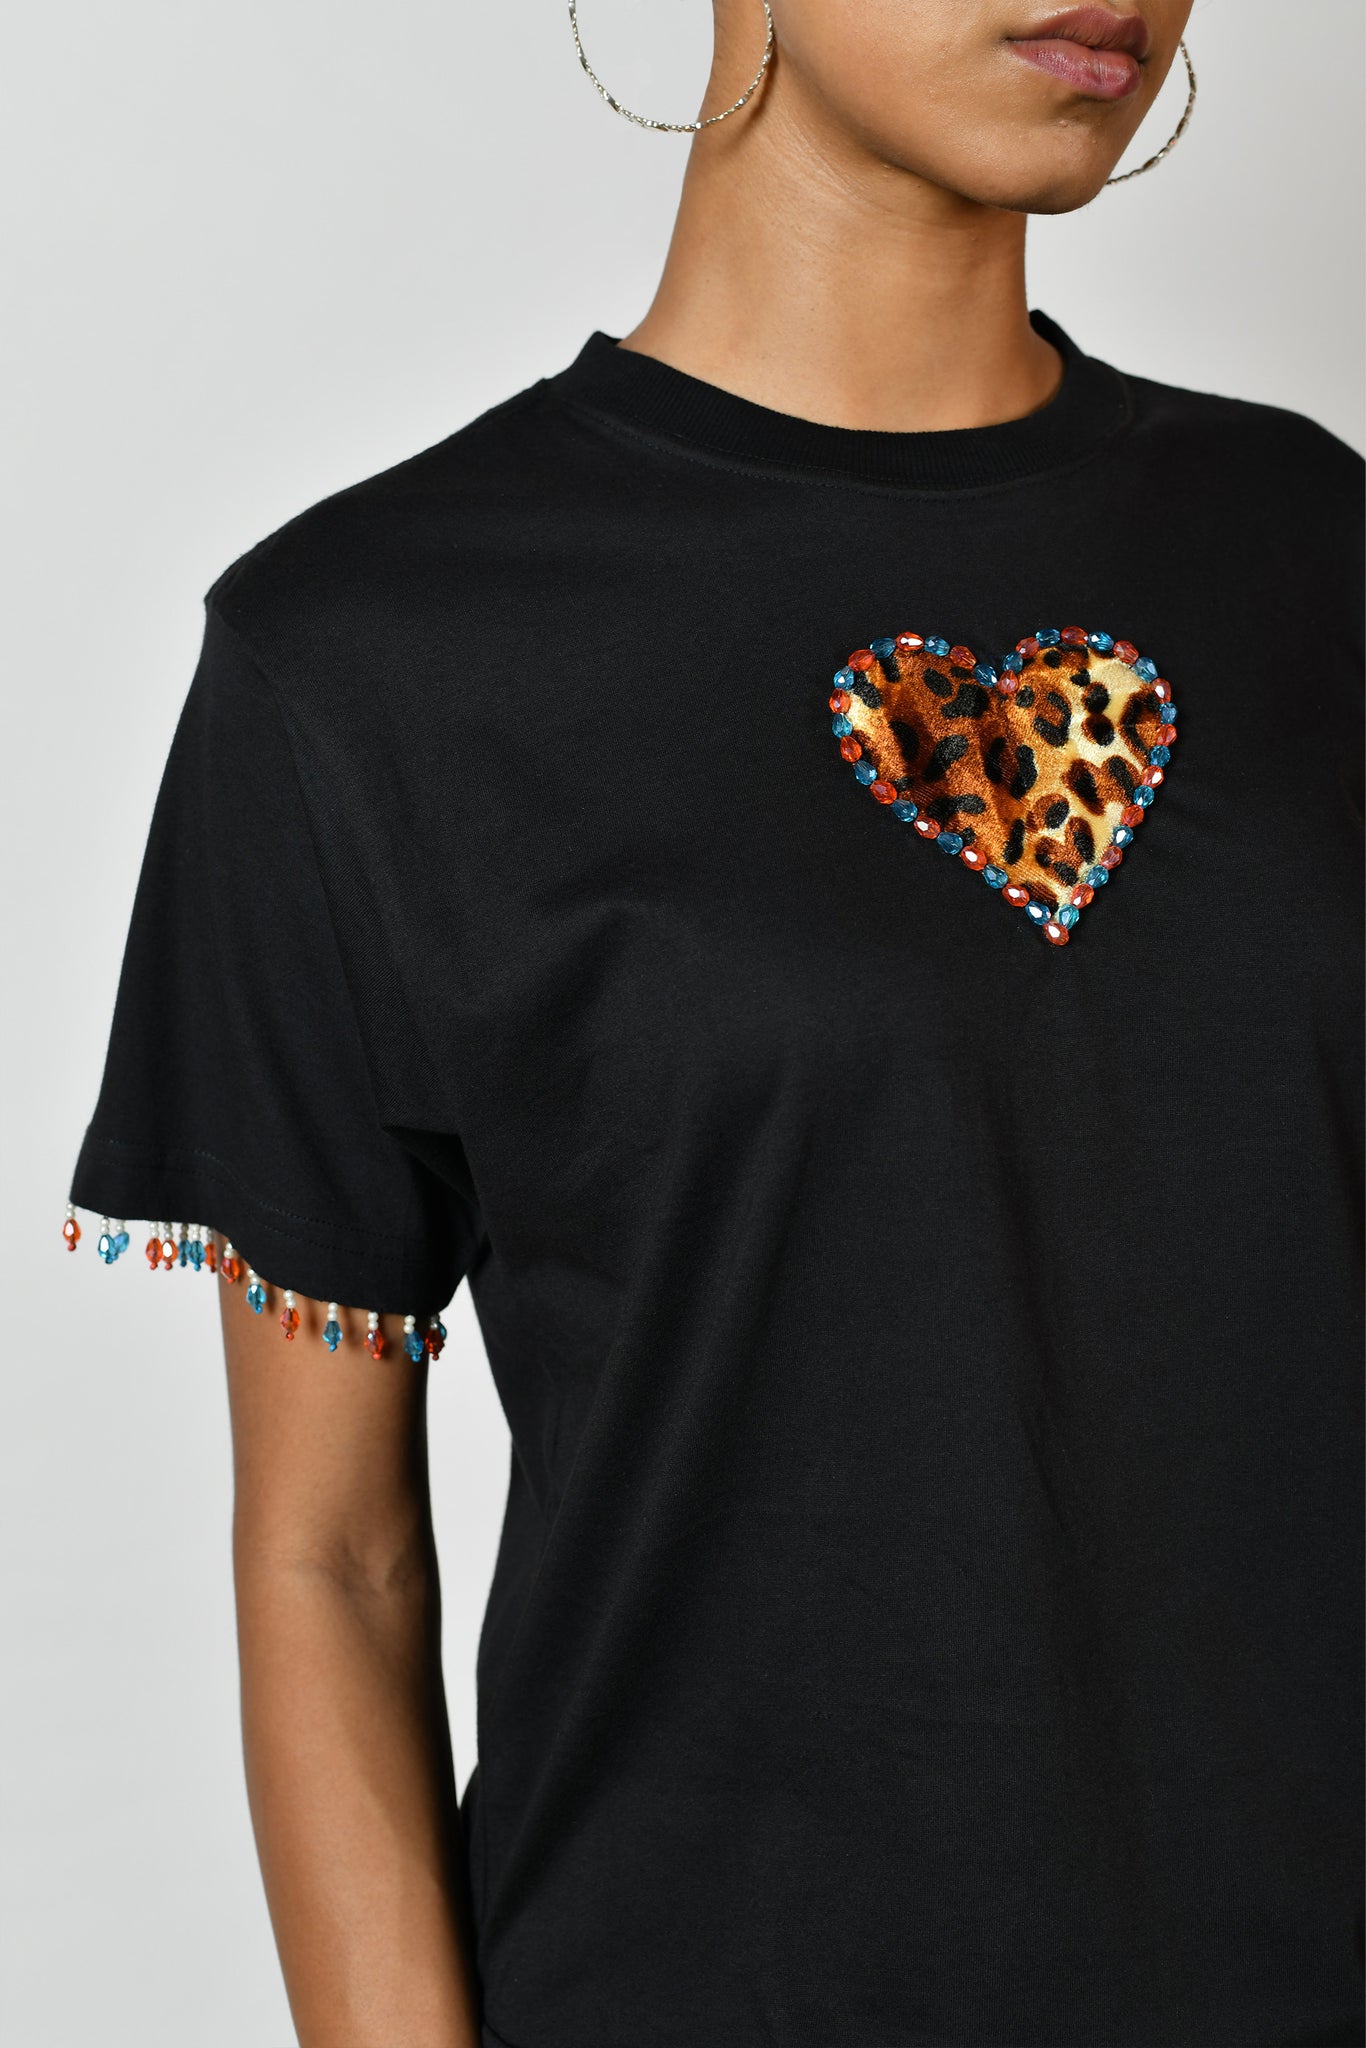 One Bead at a Time Tee [Heart]